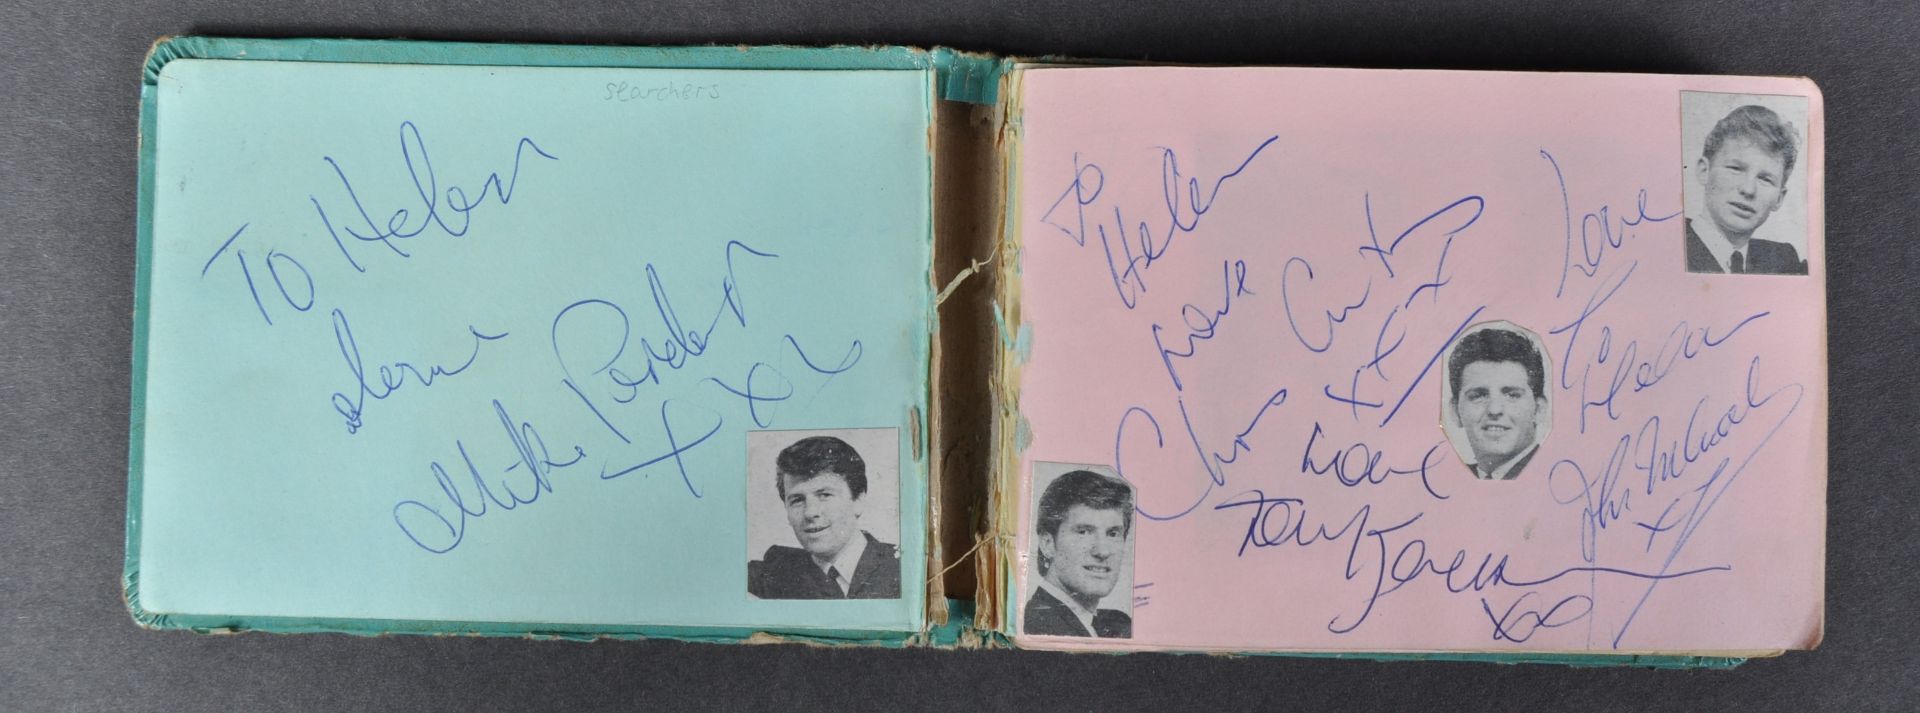 1960S MUSIC AUTOGRAPH ALBUMS - OBTAINED FROM DISCS-A-GOGO - Image 5 of 31